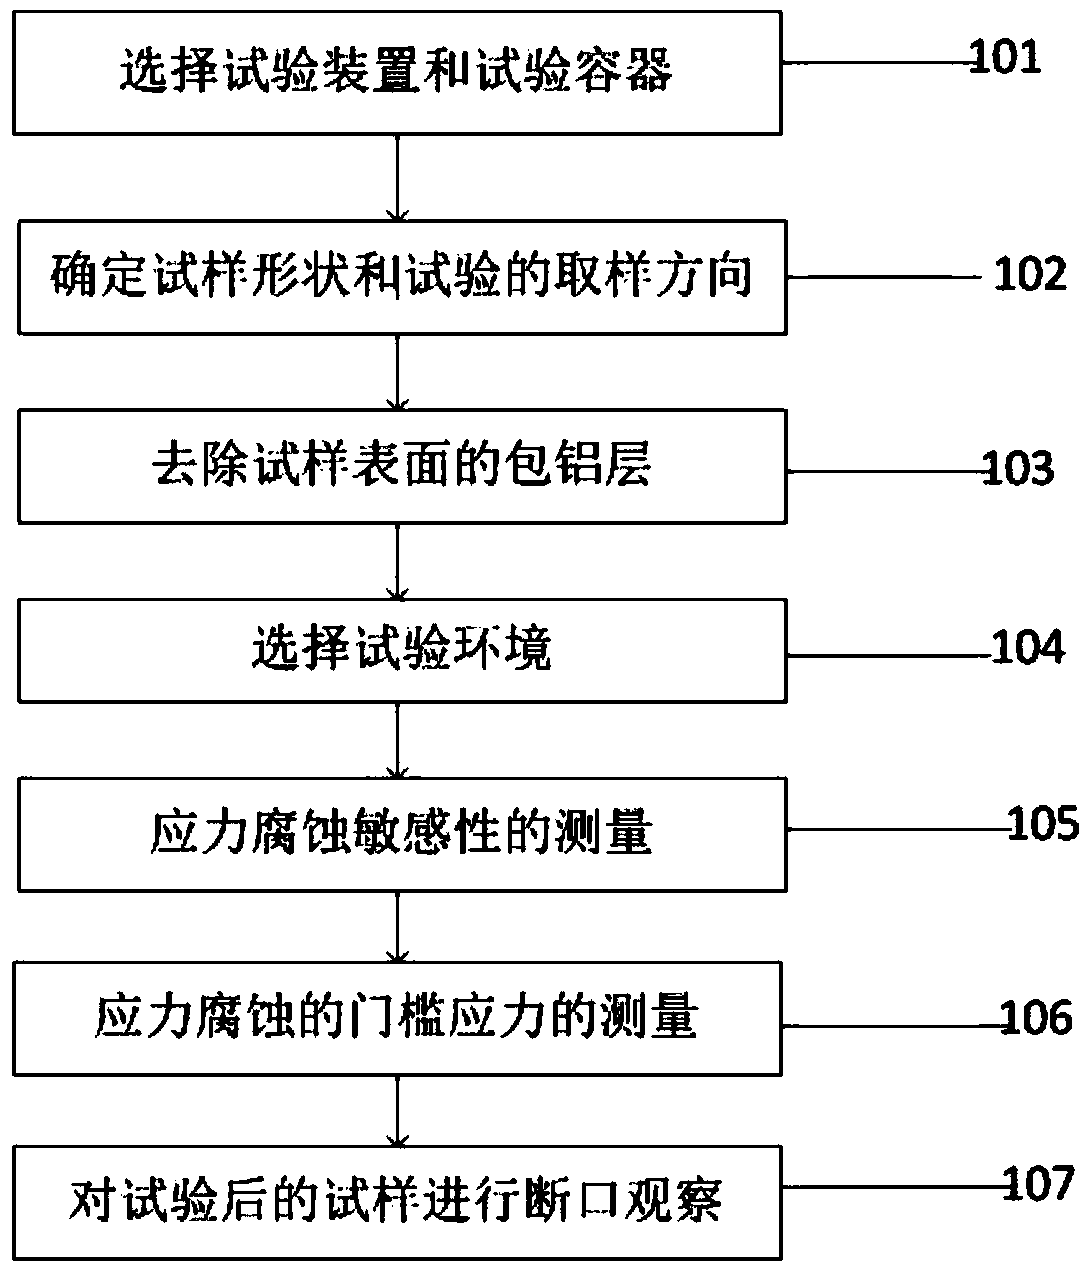 Method for measuring stretching stress corrosion of deforming aluminium alloy